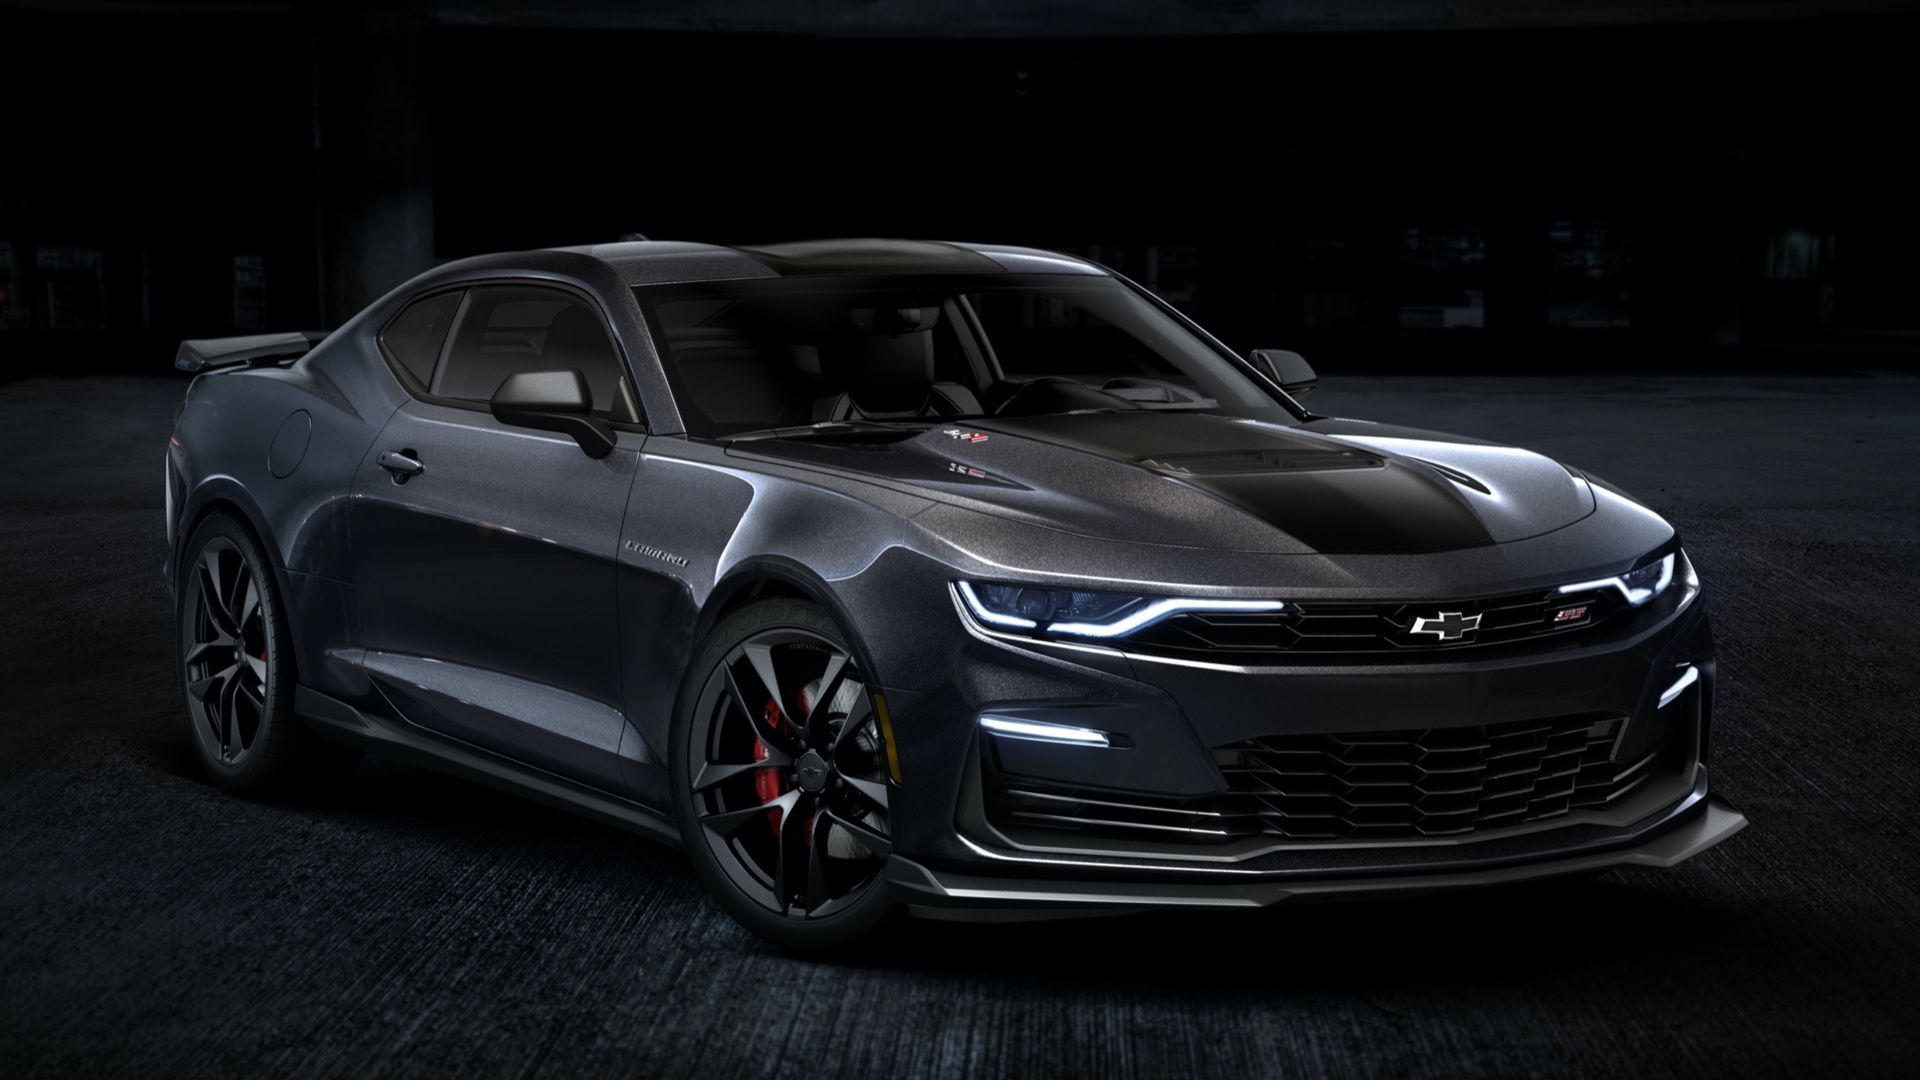 unveiling the best affordable sports coupe with 300+ horsepower